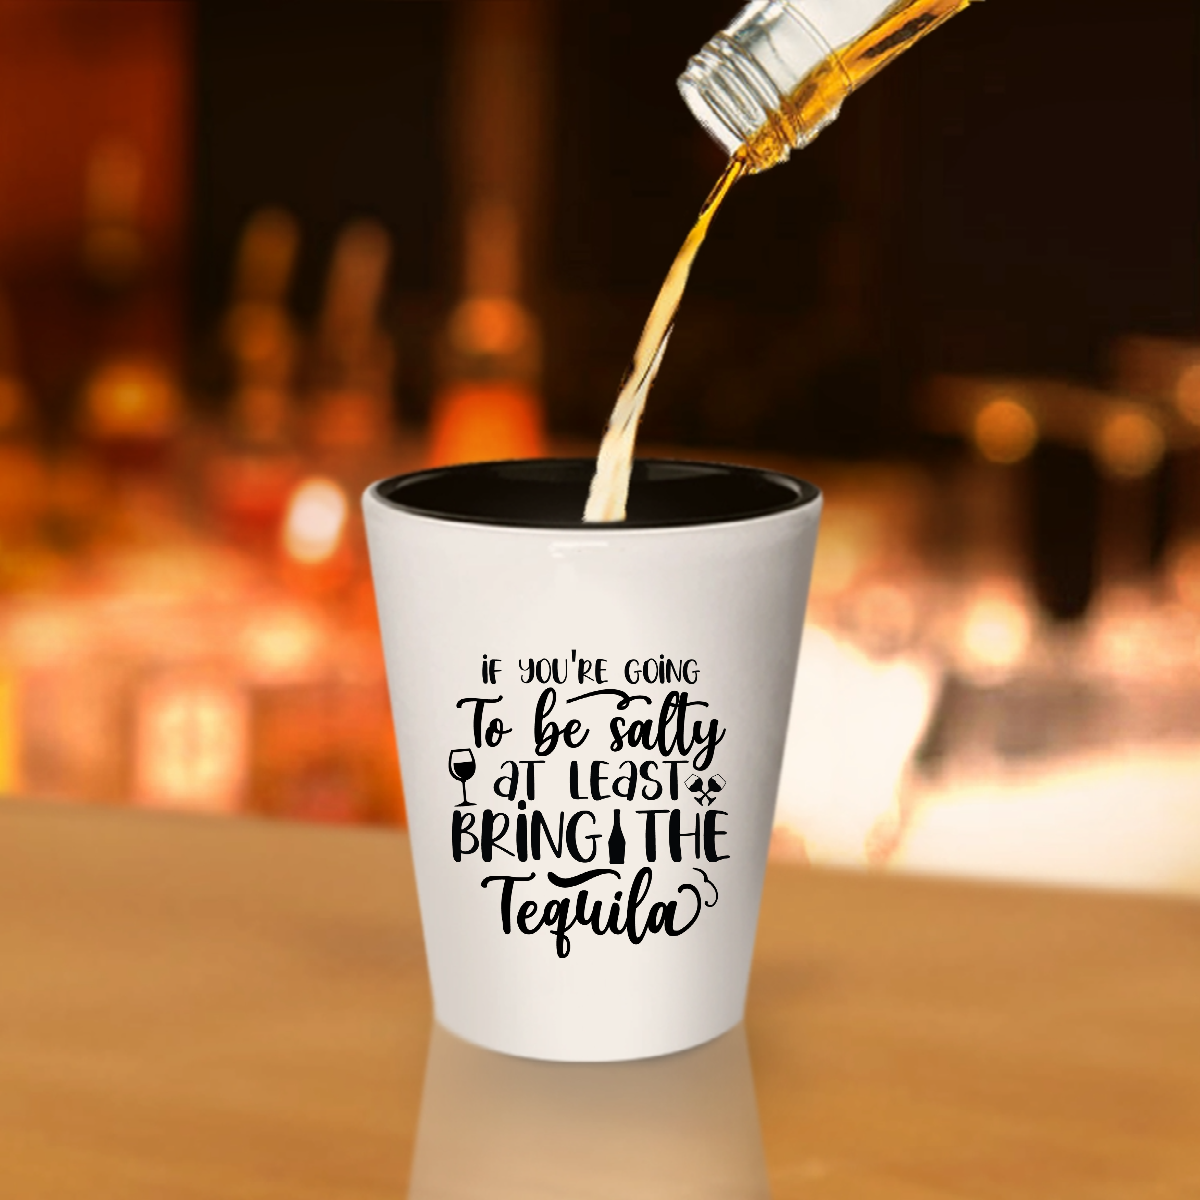 If You're Going To Be Salty At Least Bring The Tequila - Shot Glass